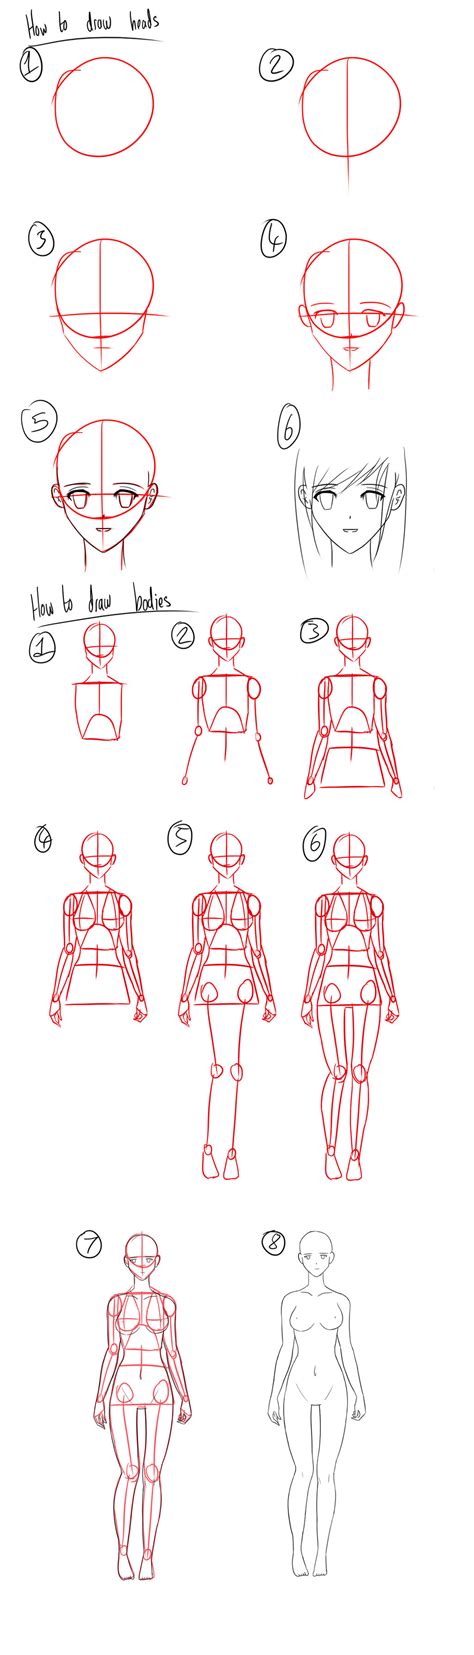 Tutorial How To Draw Anime Headsfemale Bodies By Micky K On Deviantart